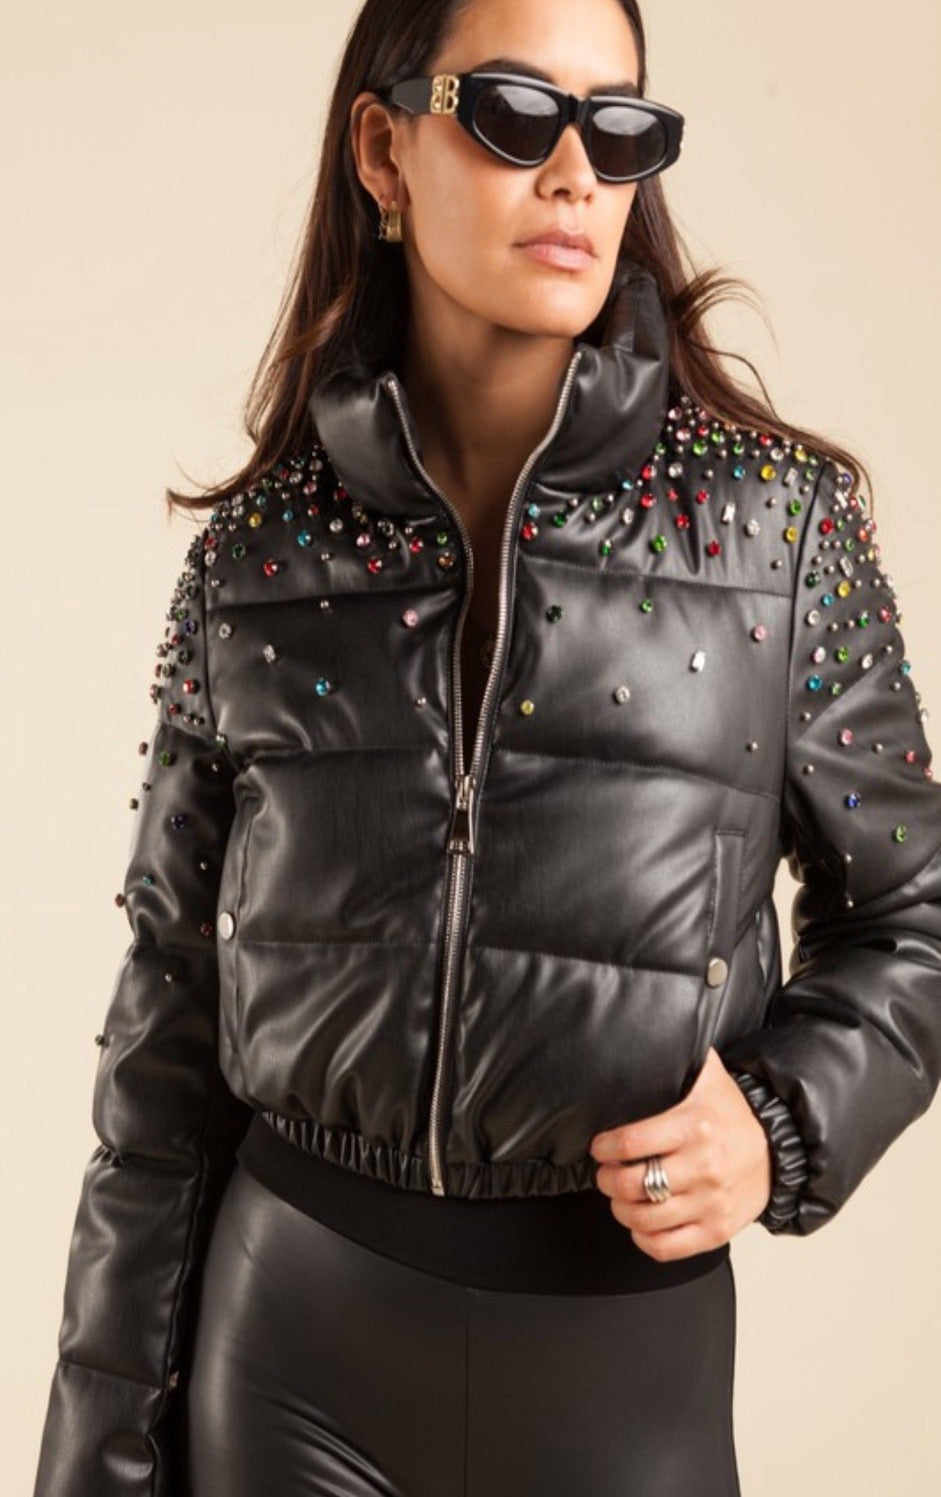 The Rich Girl Jacket